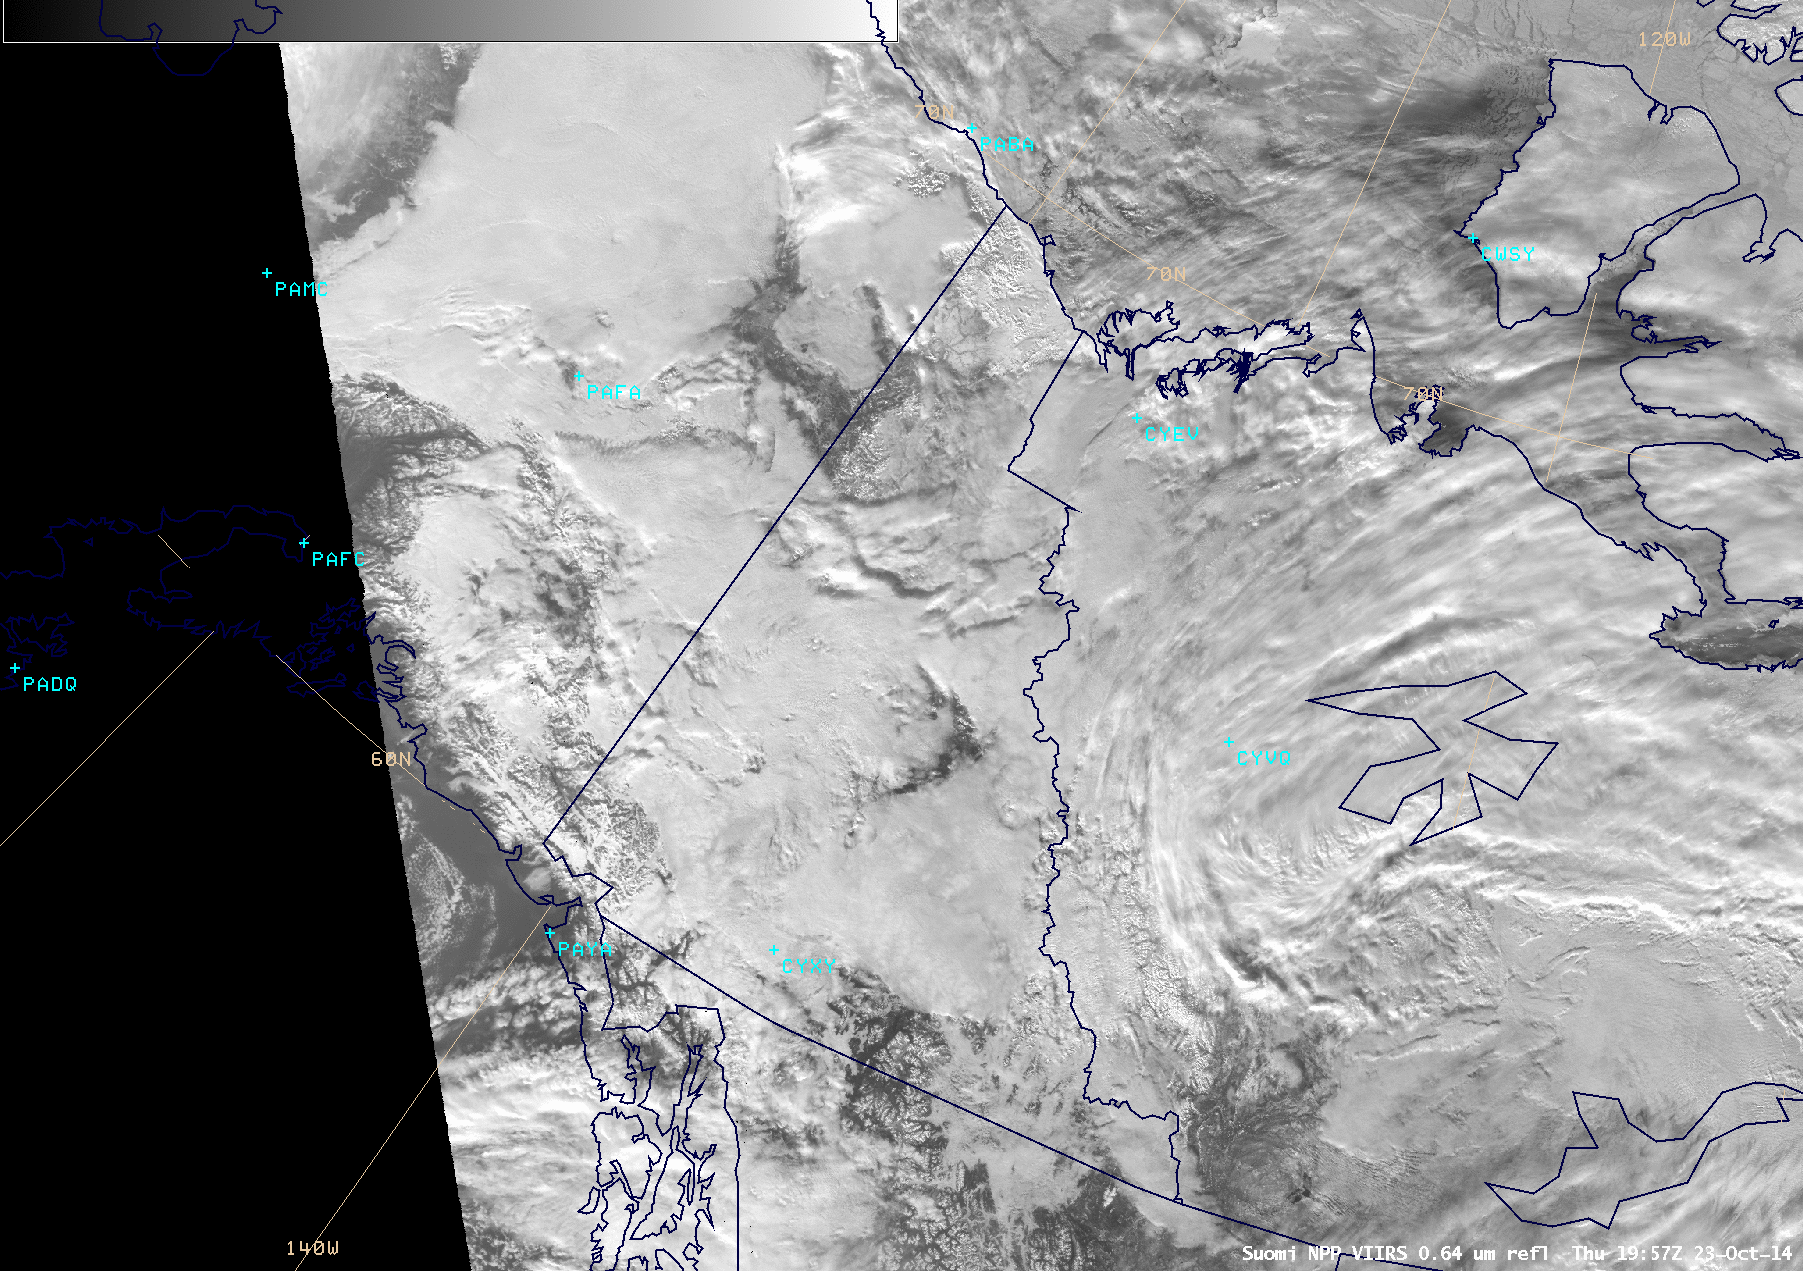 Suomi NPP VIIRS 0.64 µm visible channel images